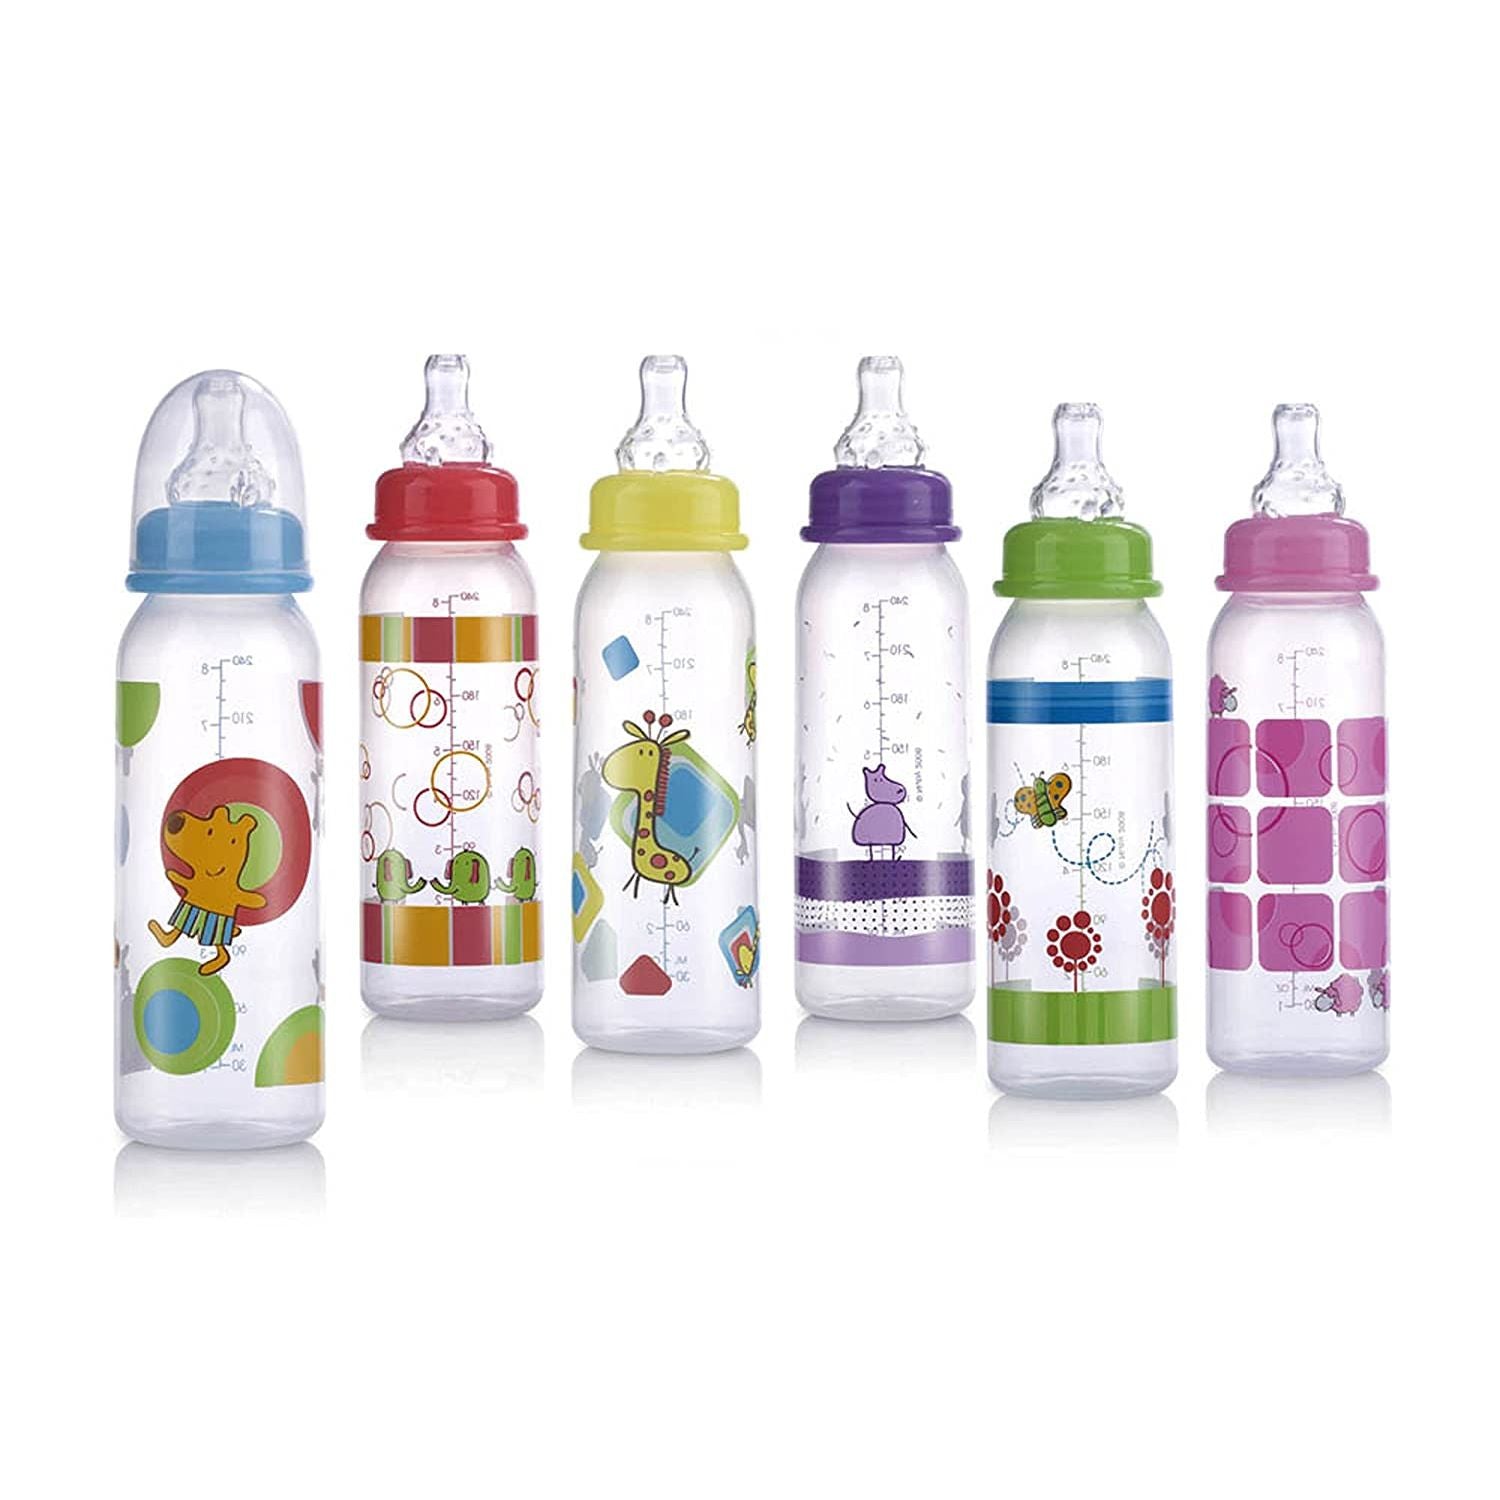 Nuby Printed Non Drip Standard Bottle, Colors May Vary, 2 Count